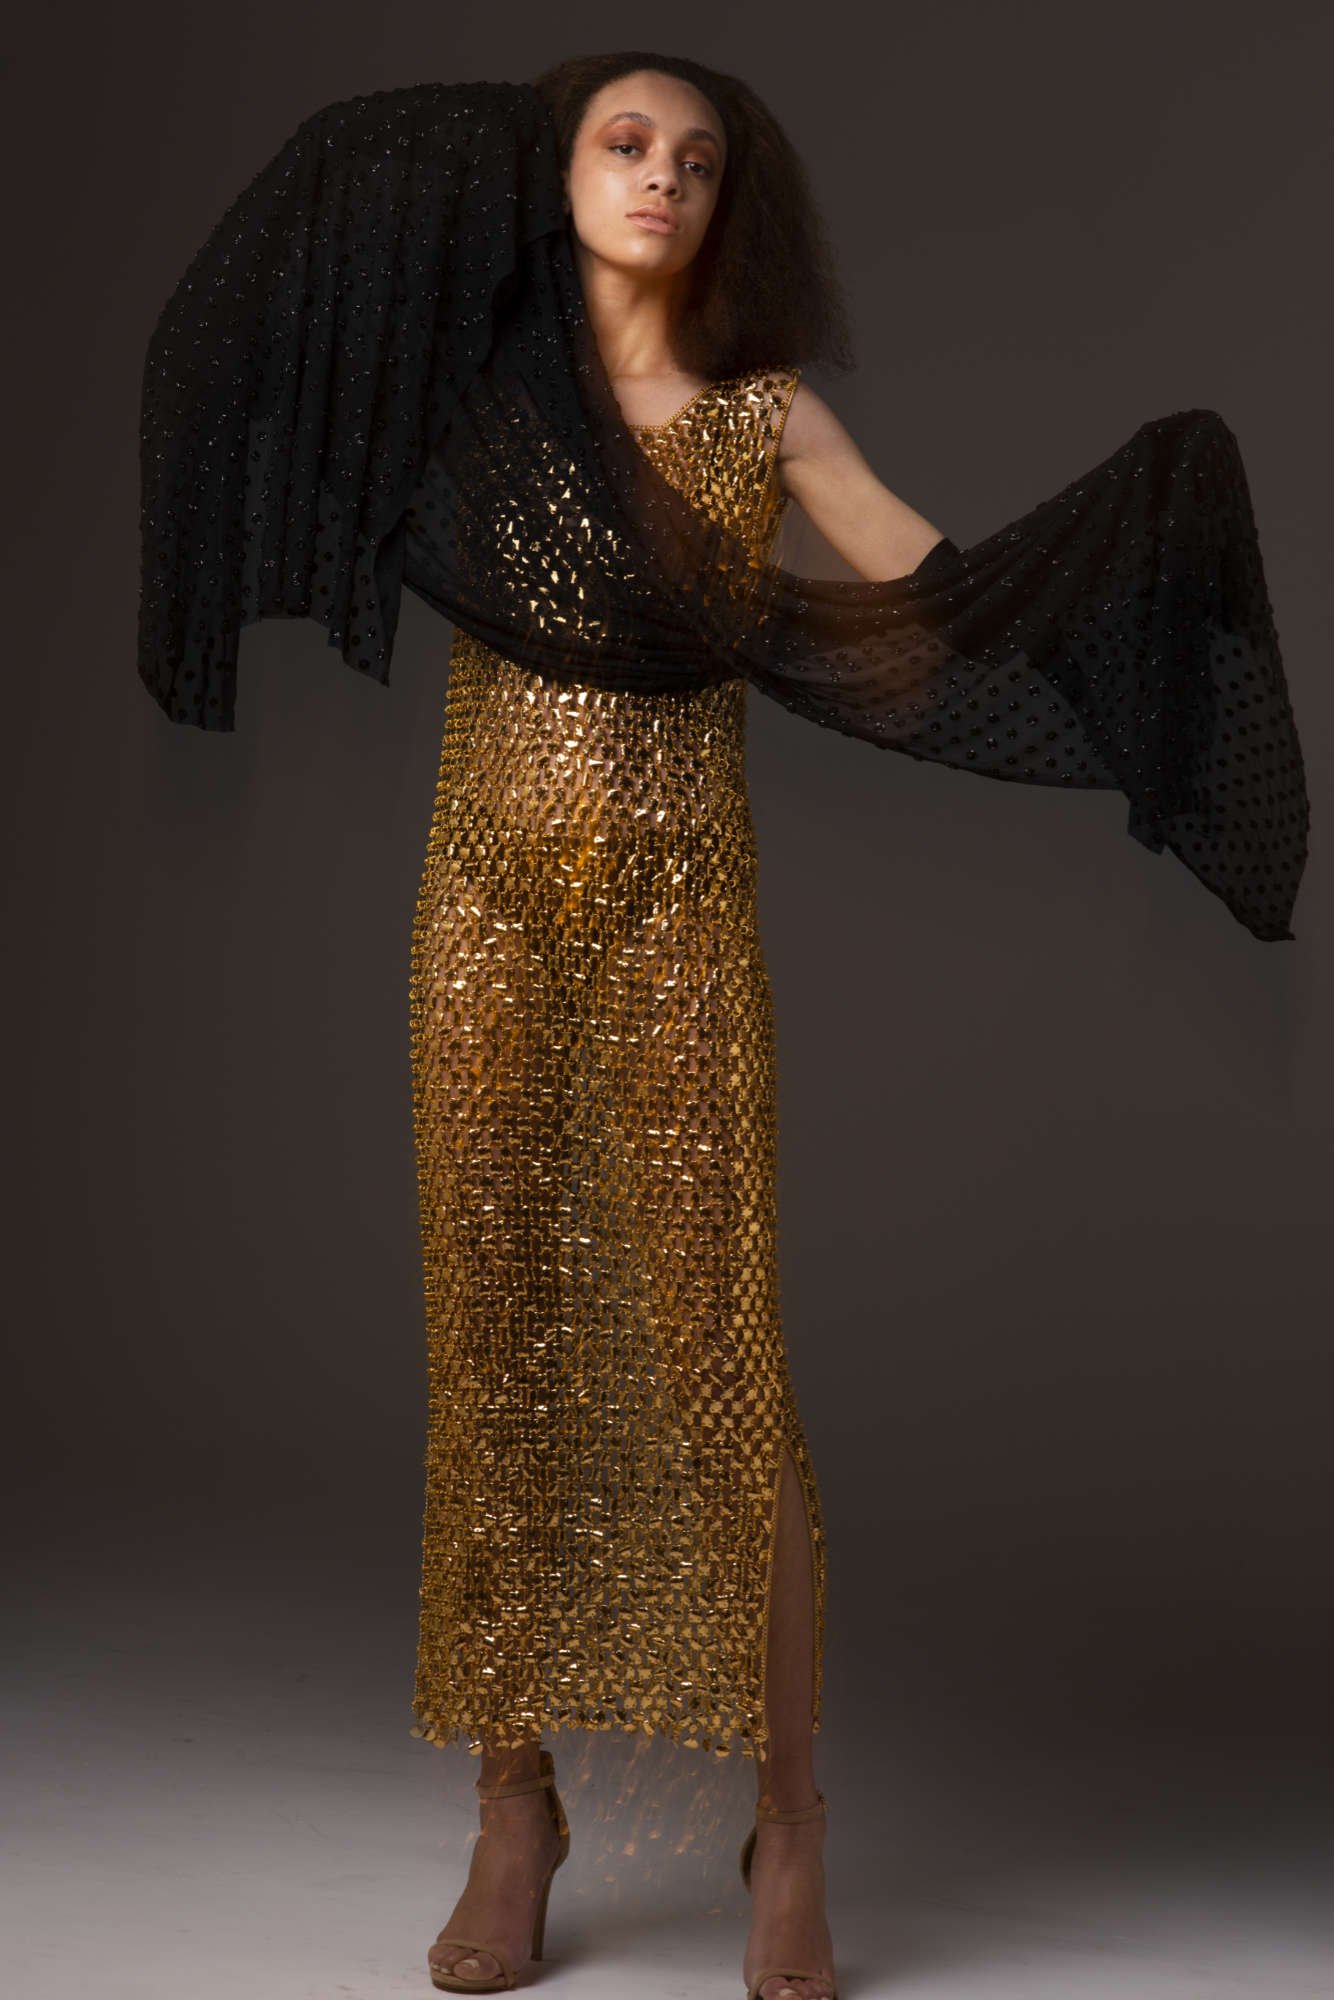 vintage gold chainmail dress and fabric.jpg